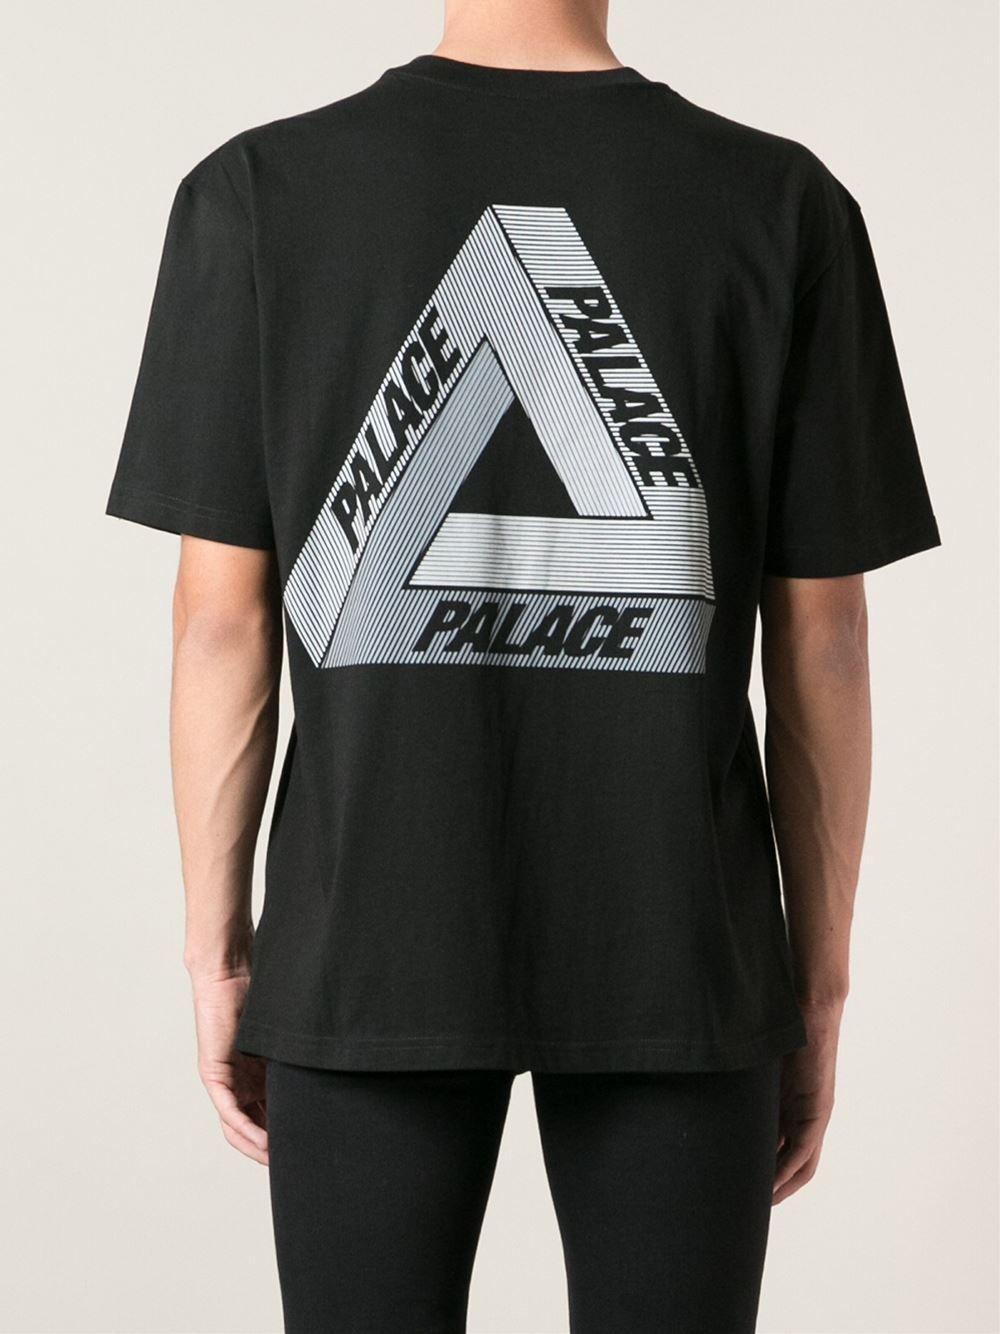 Palace Clothes Logo - Palace Logo T Shirt In Black For Men